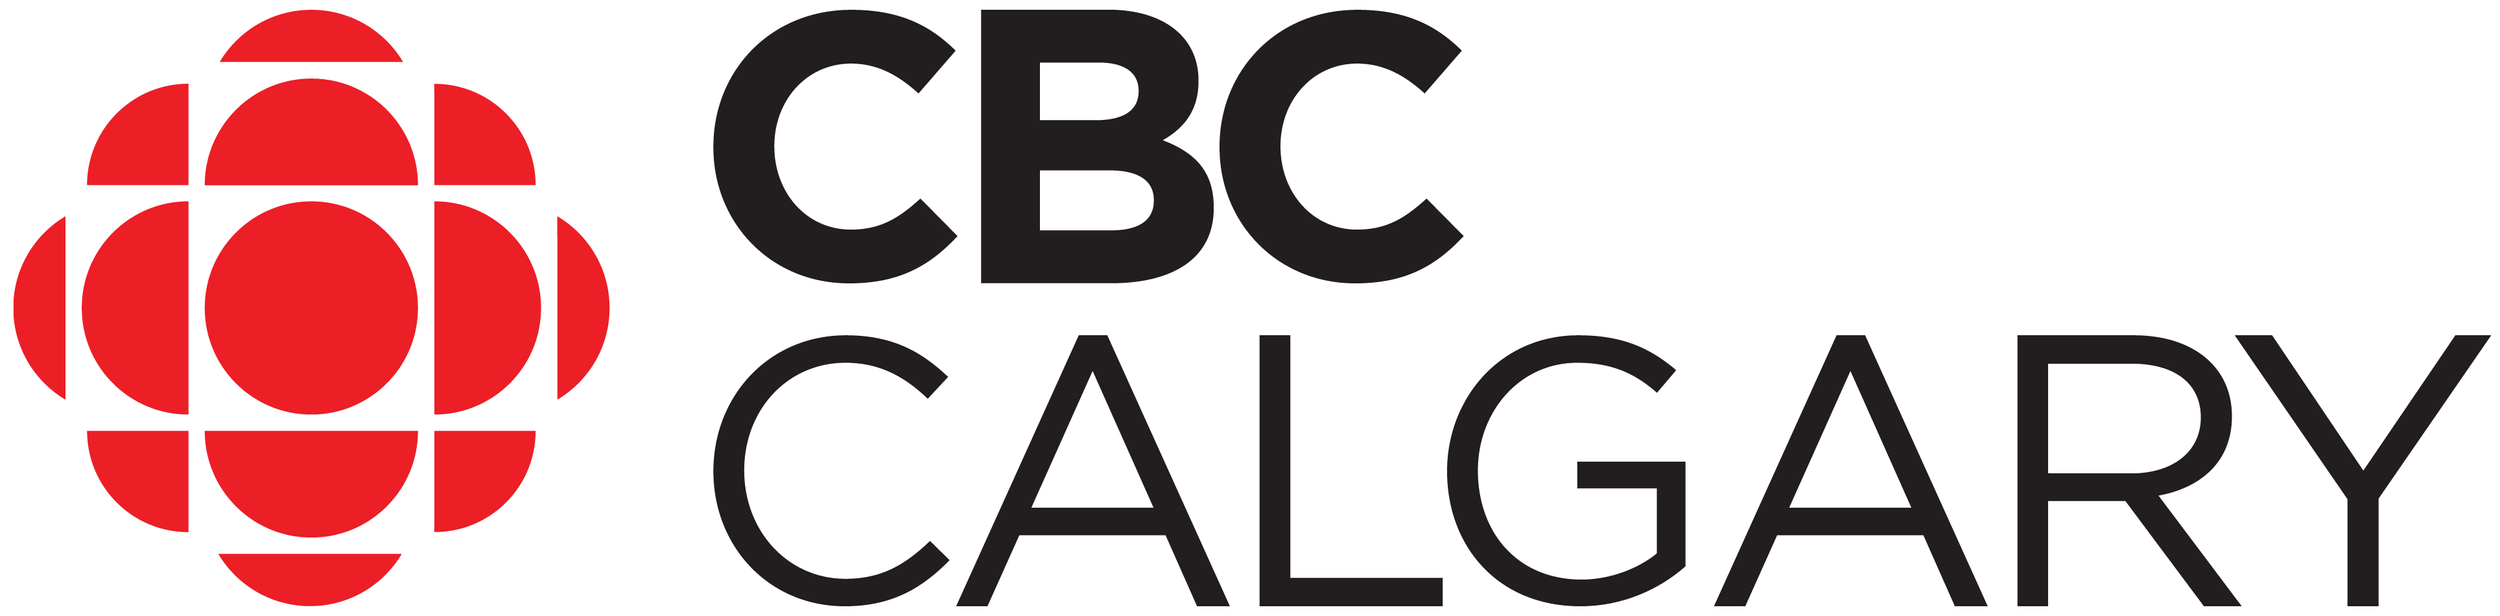 CBC_Local_CGY_CLR-01 (1).png